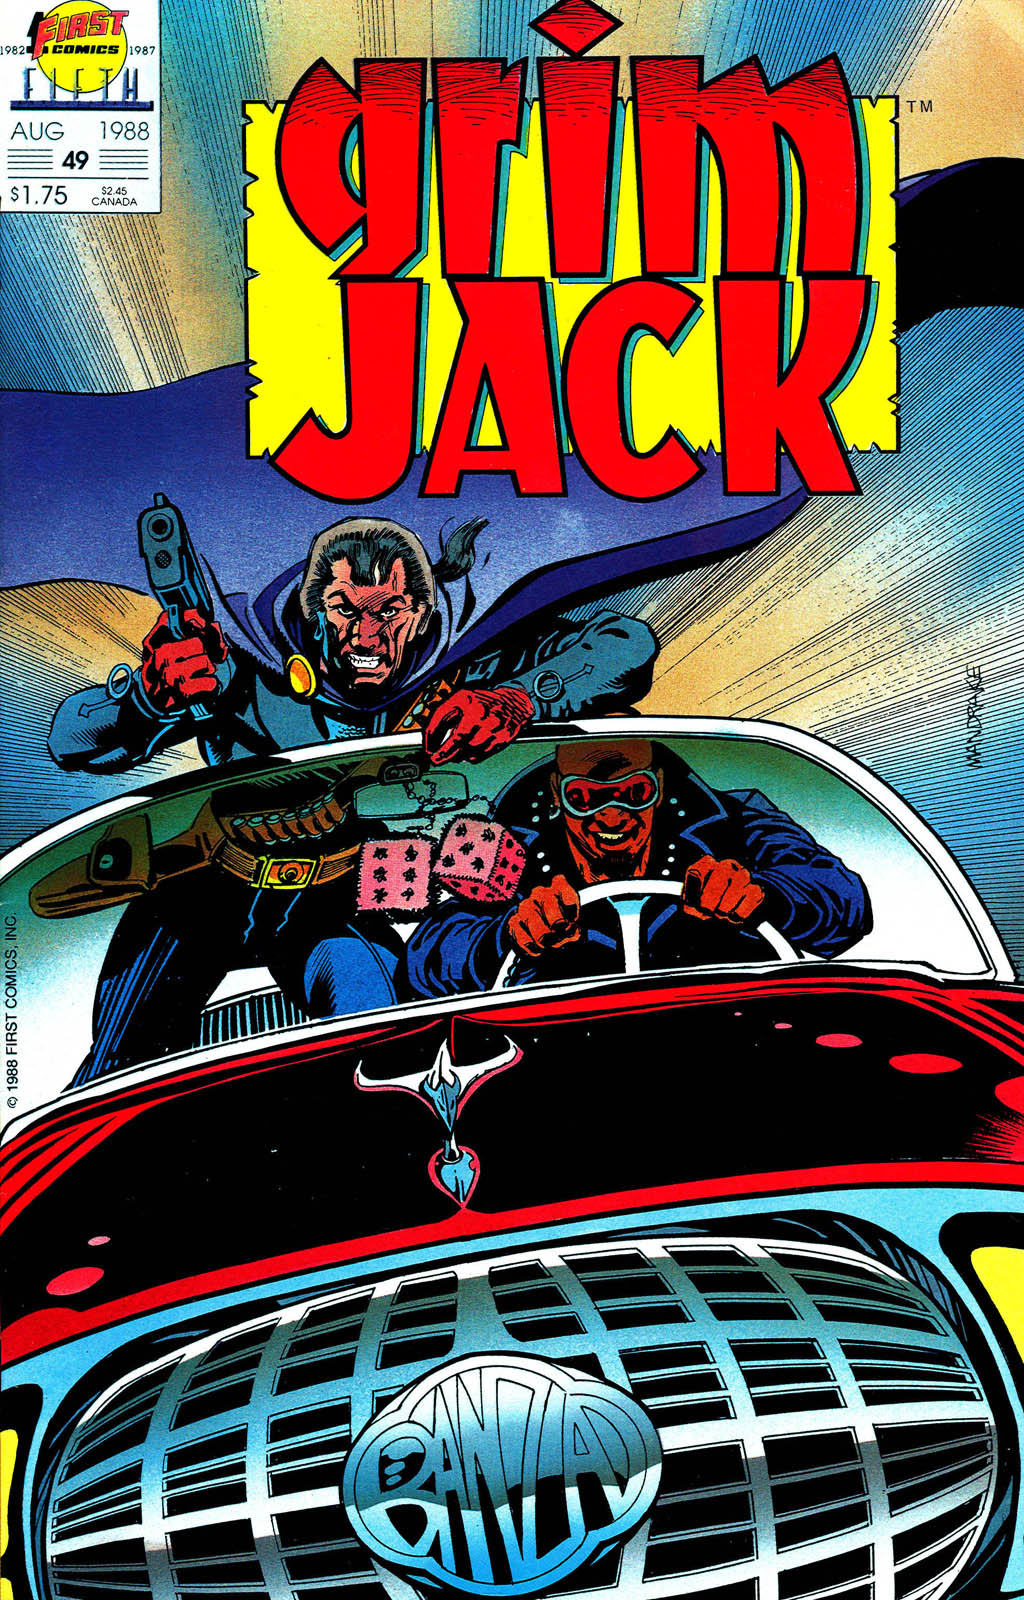 Read online Grimjack comic -  Issue #49 - 1